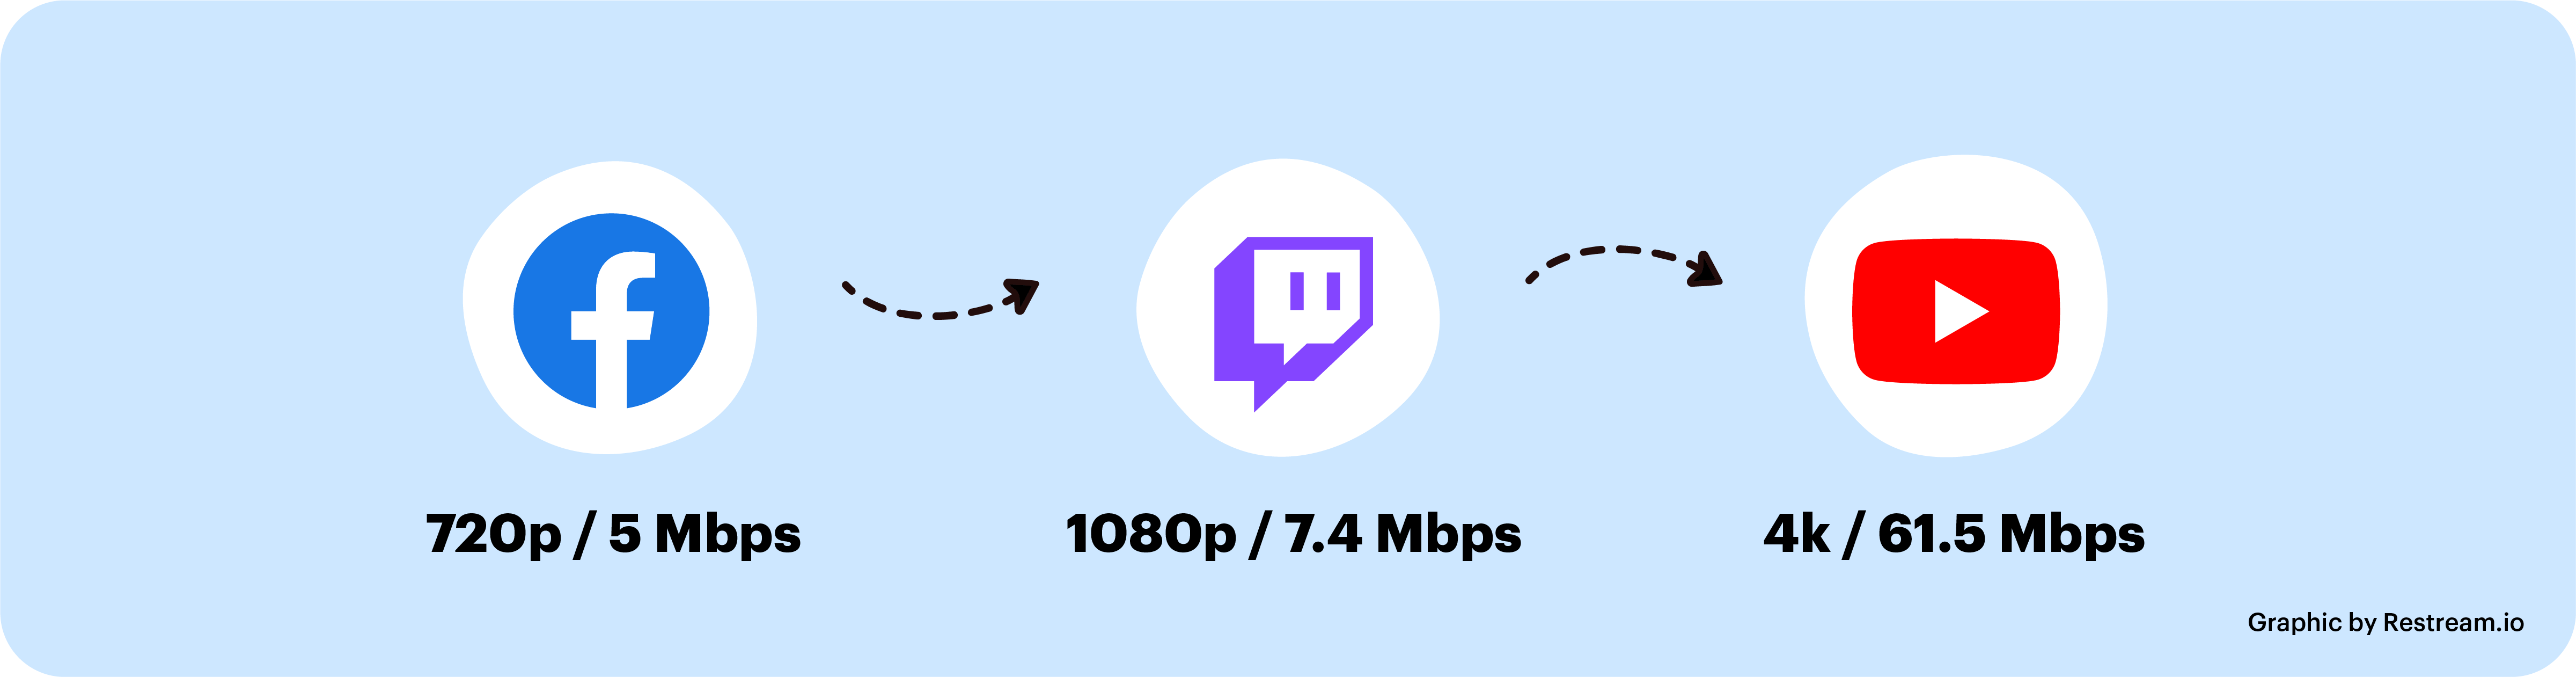 Optimal upload speed for Facebook, Twitch, YouTube